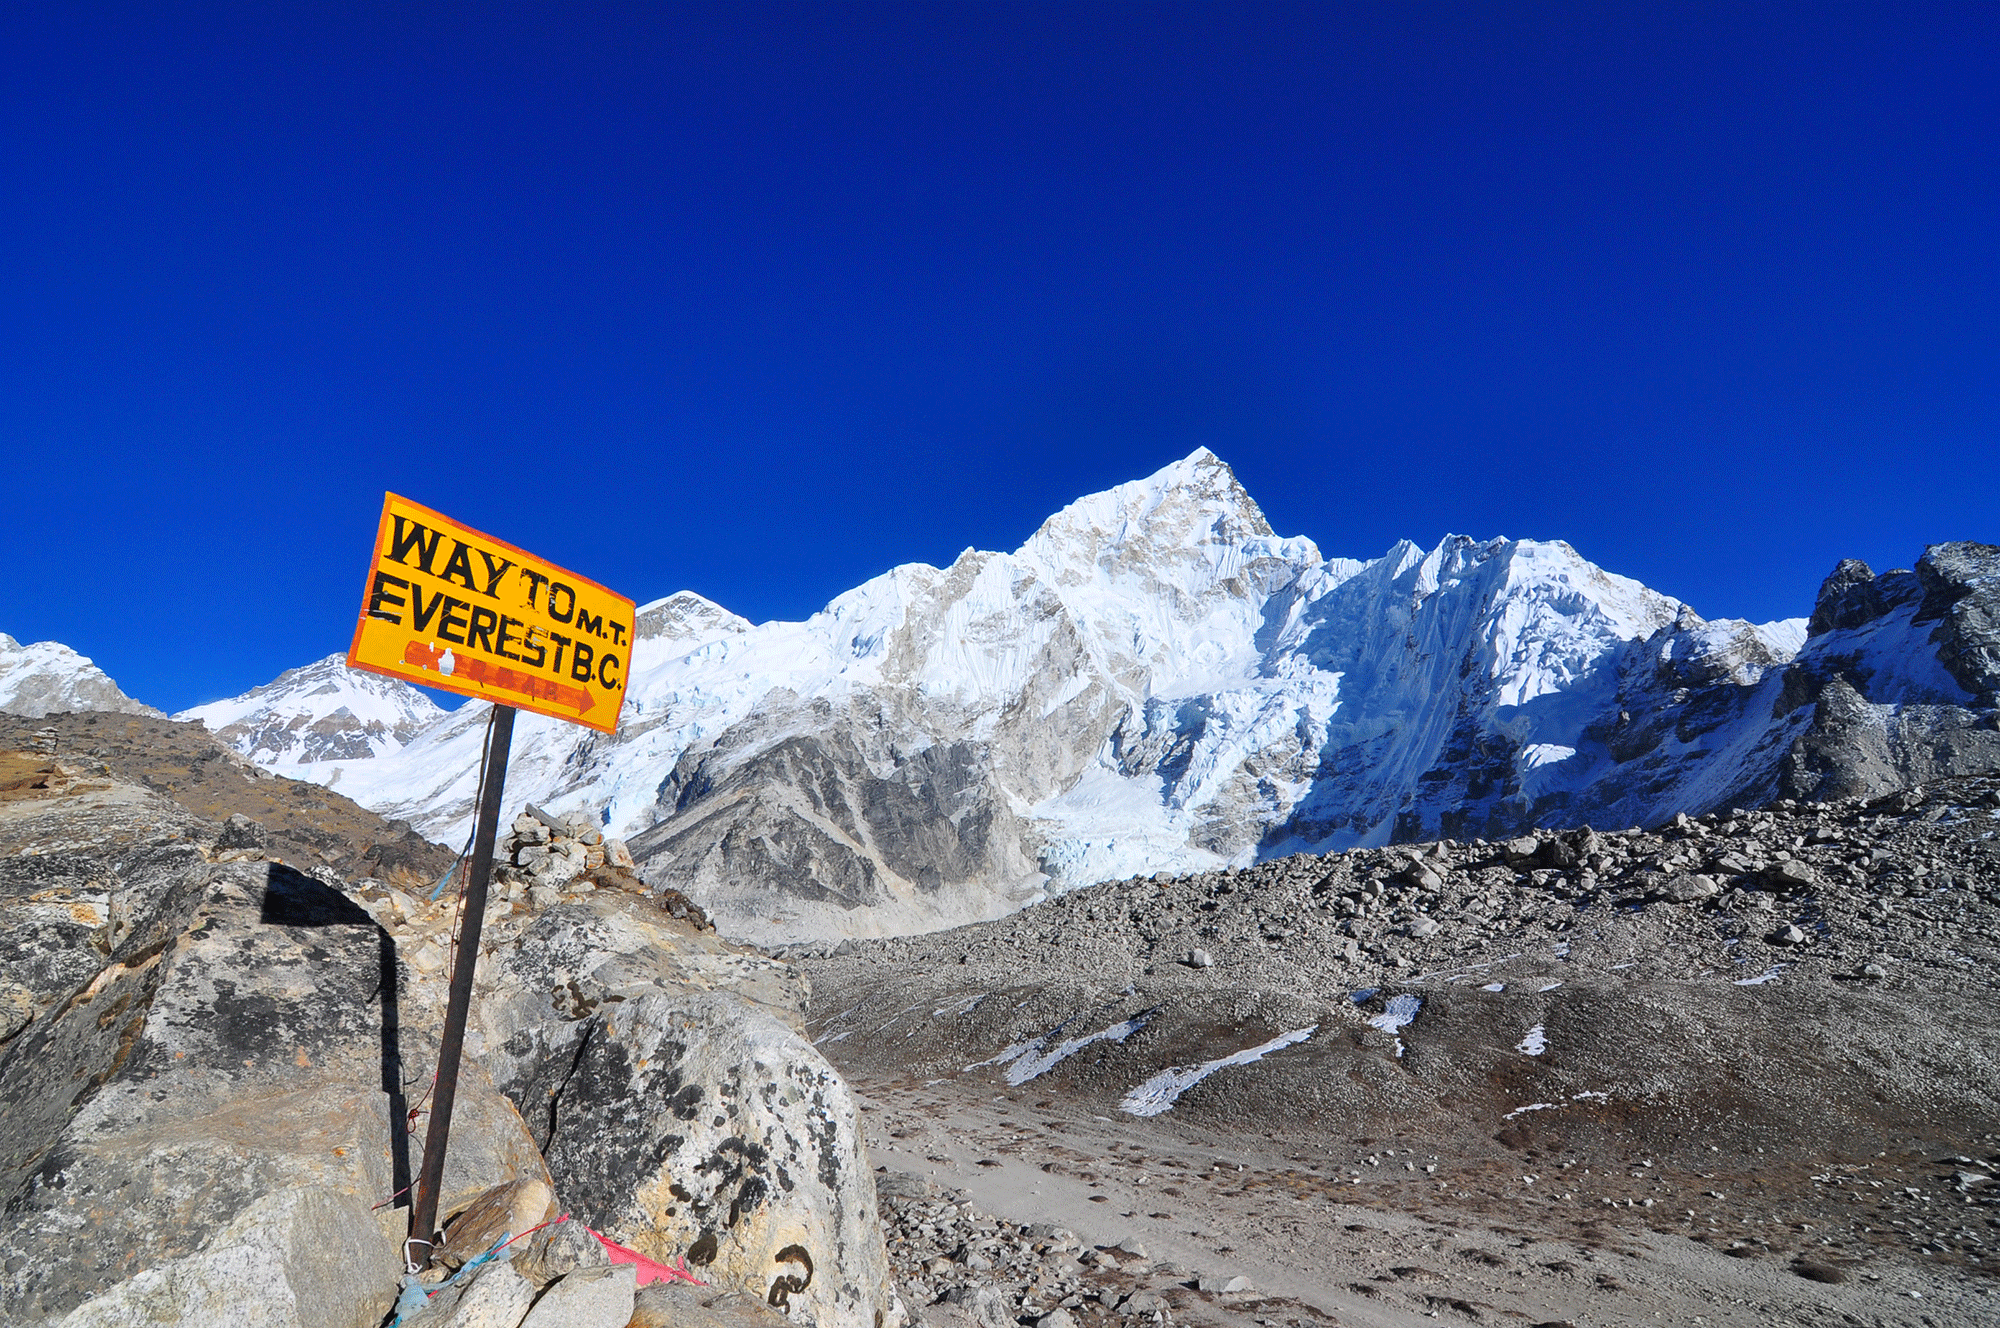 7 things you didn't know about the Everest Base Camp - The Kosha Journal